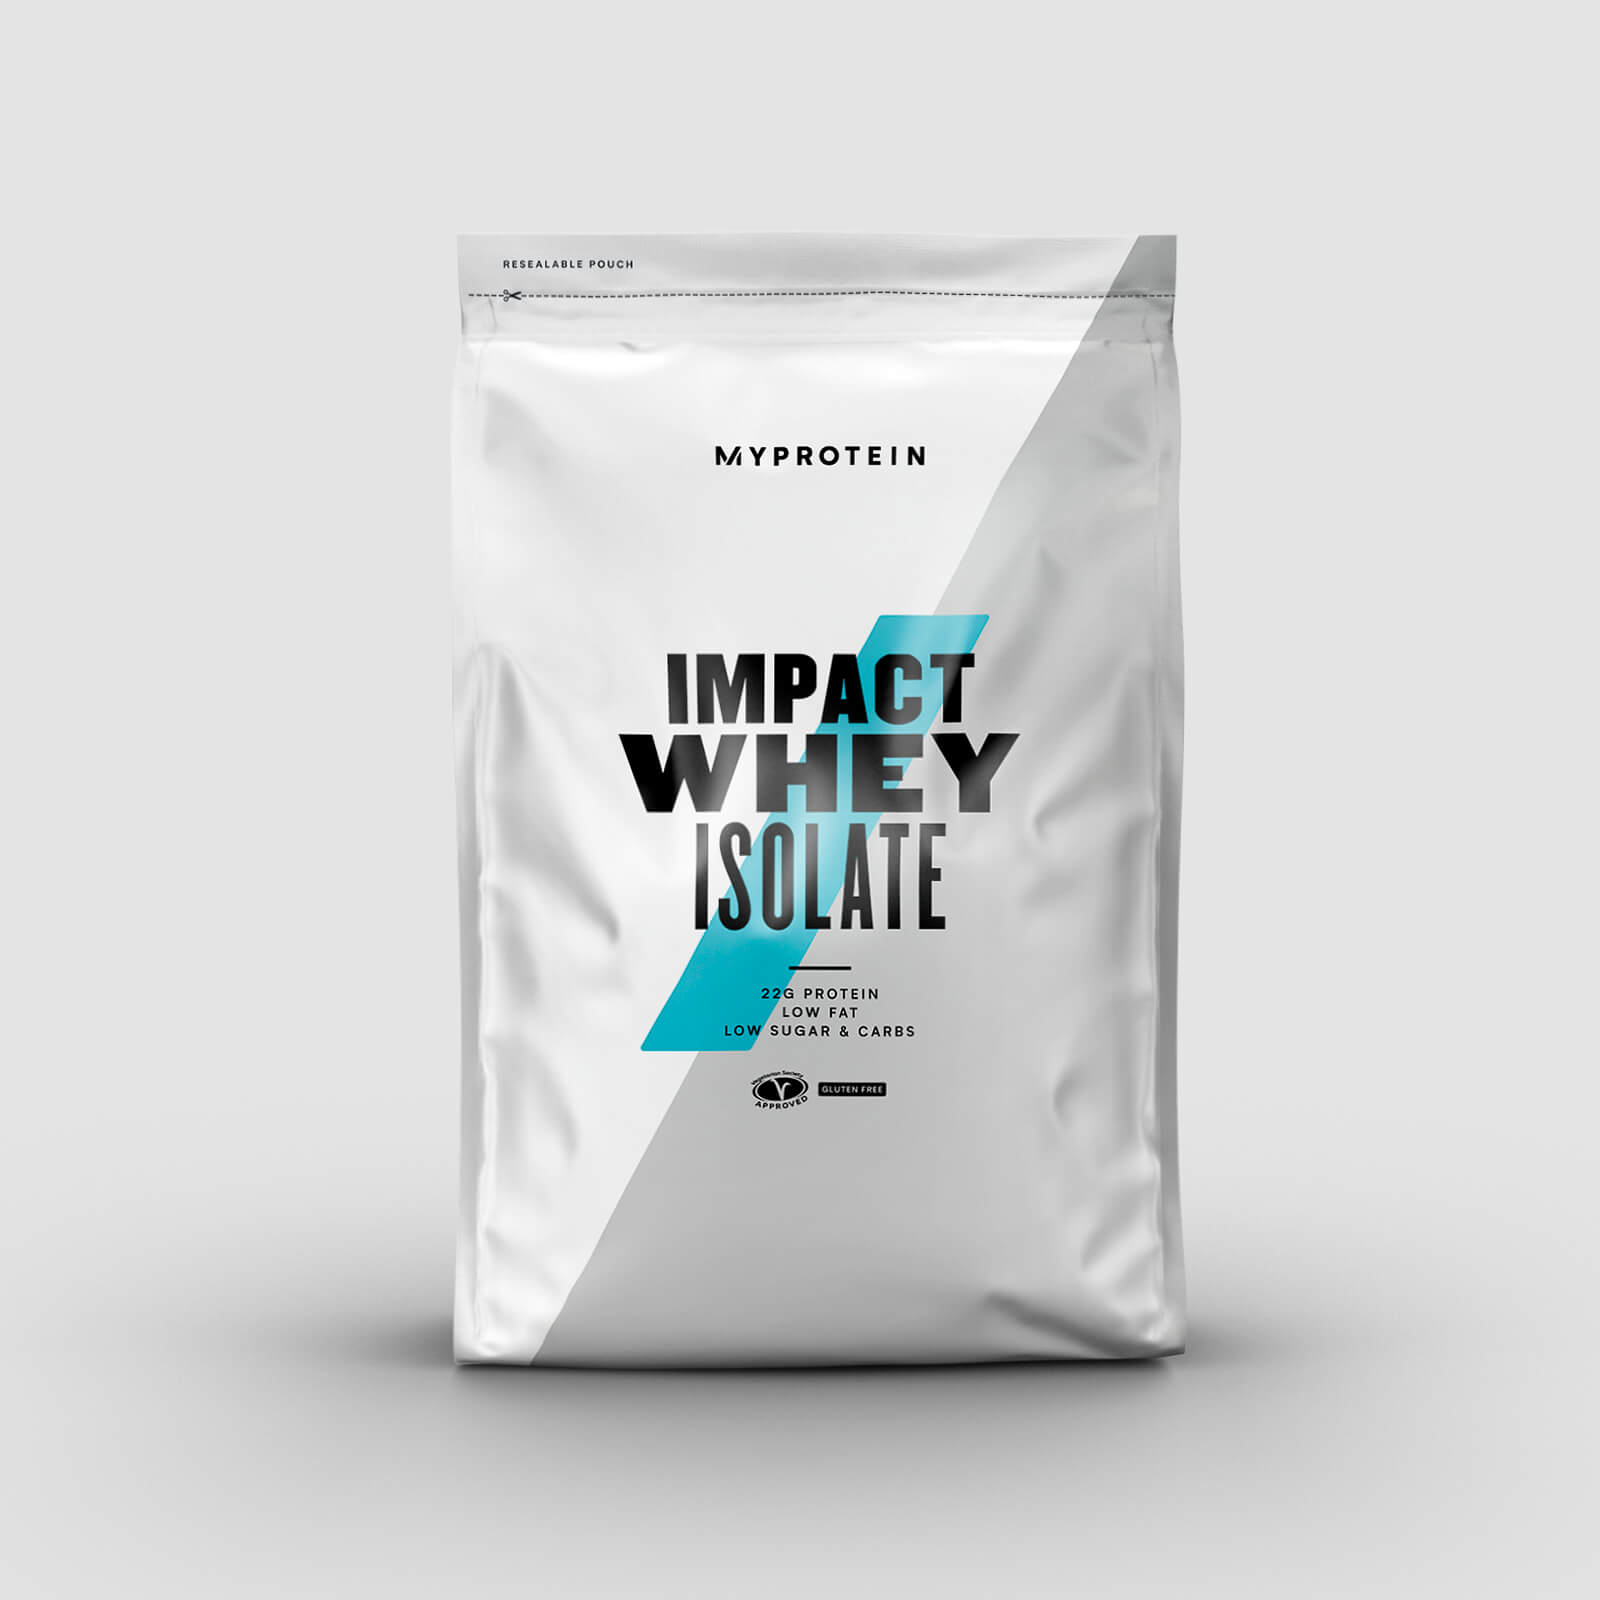 Myprotein Isolatprotein - Impact Whey Isolate - 5kg - Ny - Chocolate Peanut Butter